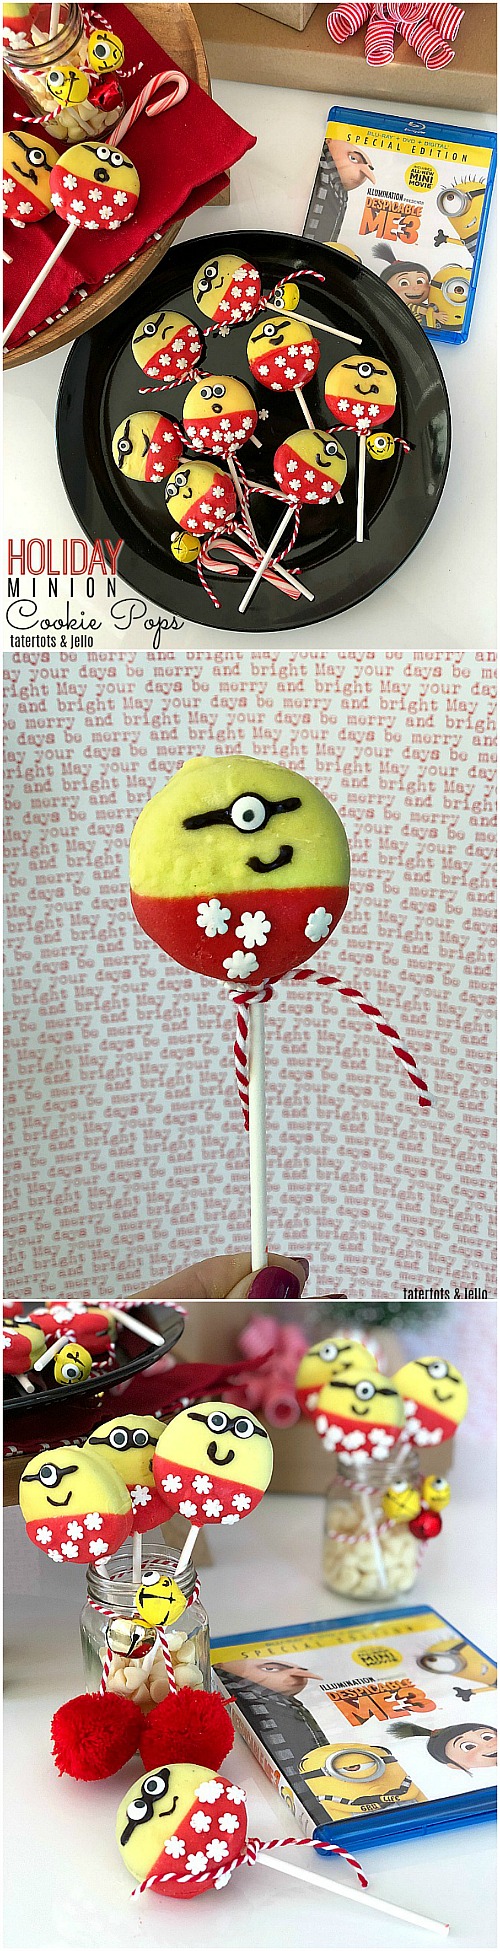 Minion Holiday Cookie Pops Party Idea